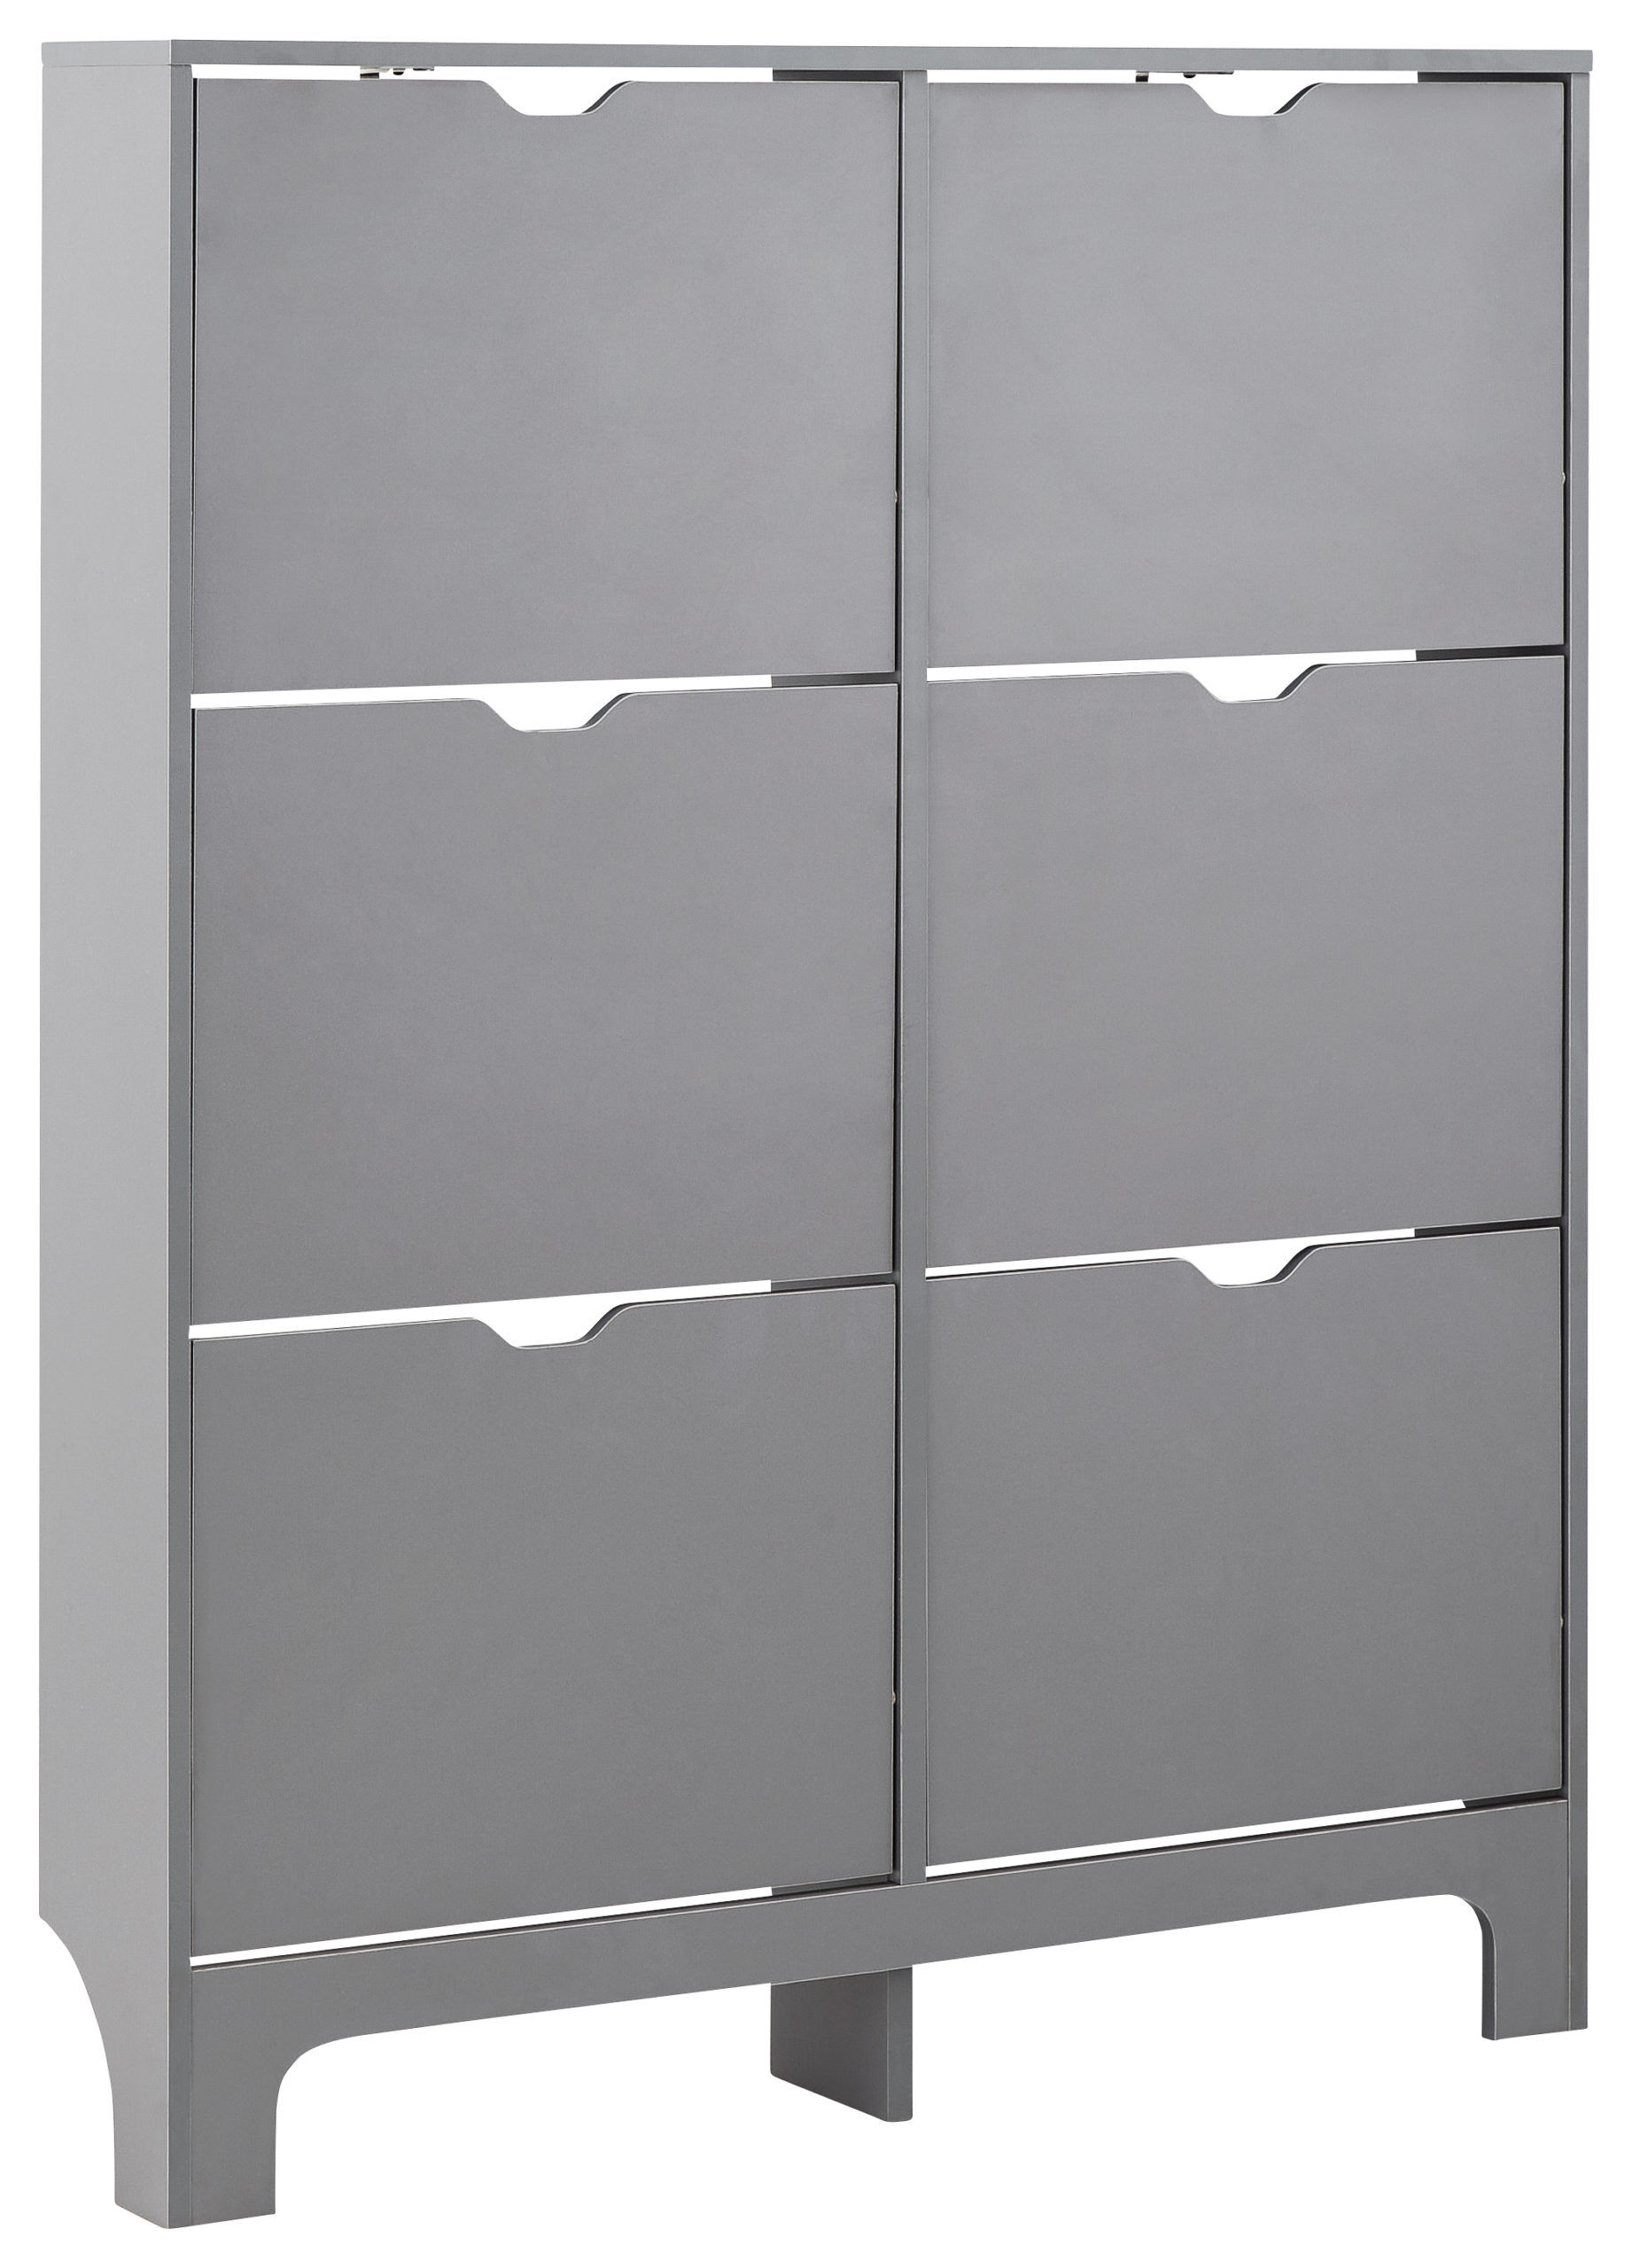 Deluxe Storage & Seating Narrow 6 Drawer Shoe Cabinet   Grey   Self Assembly